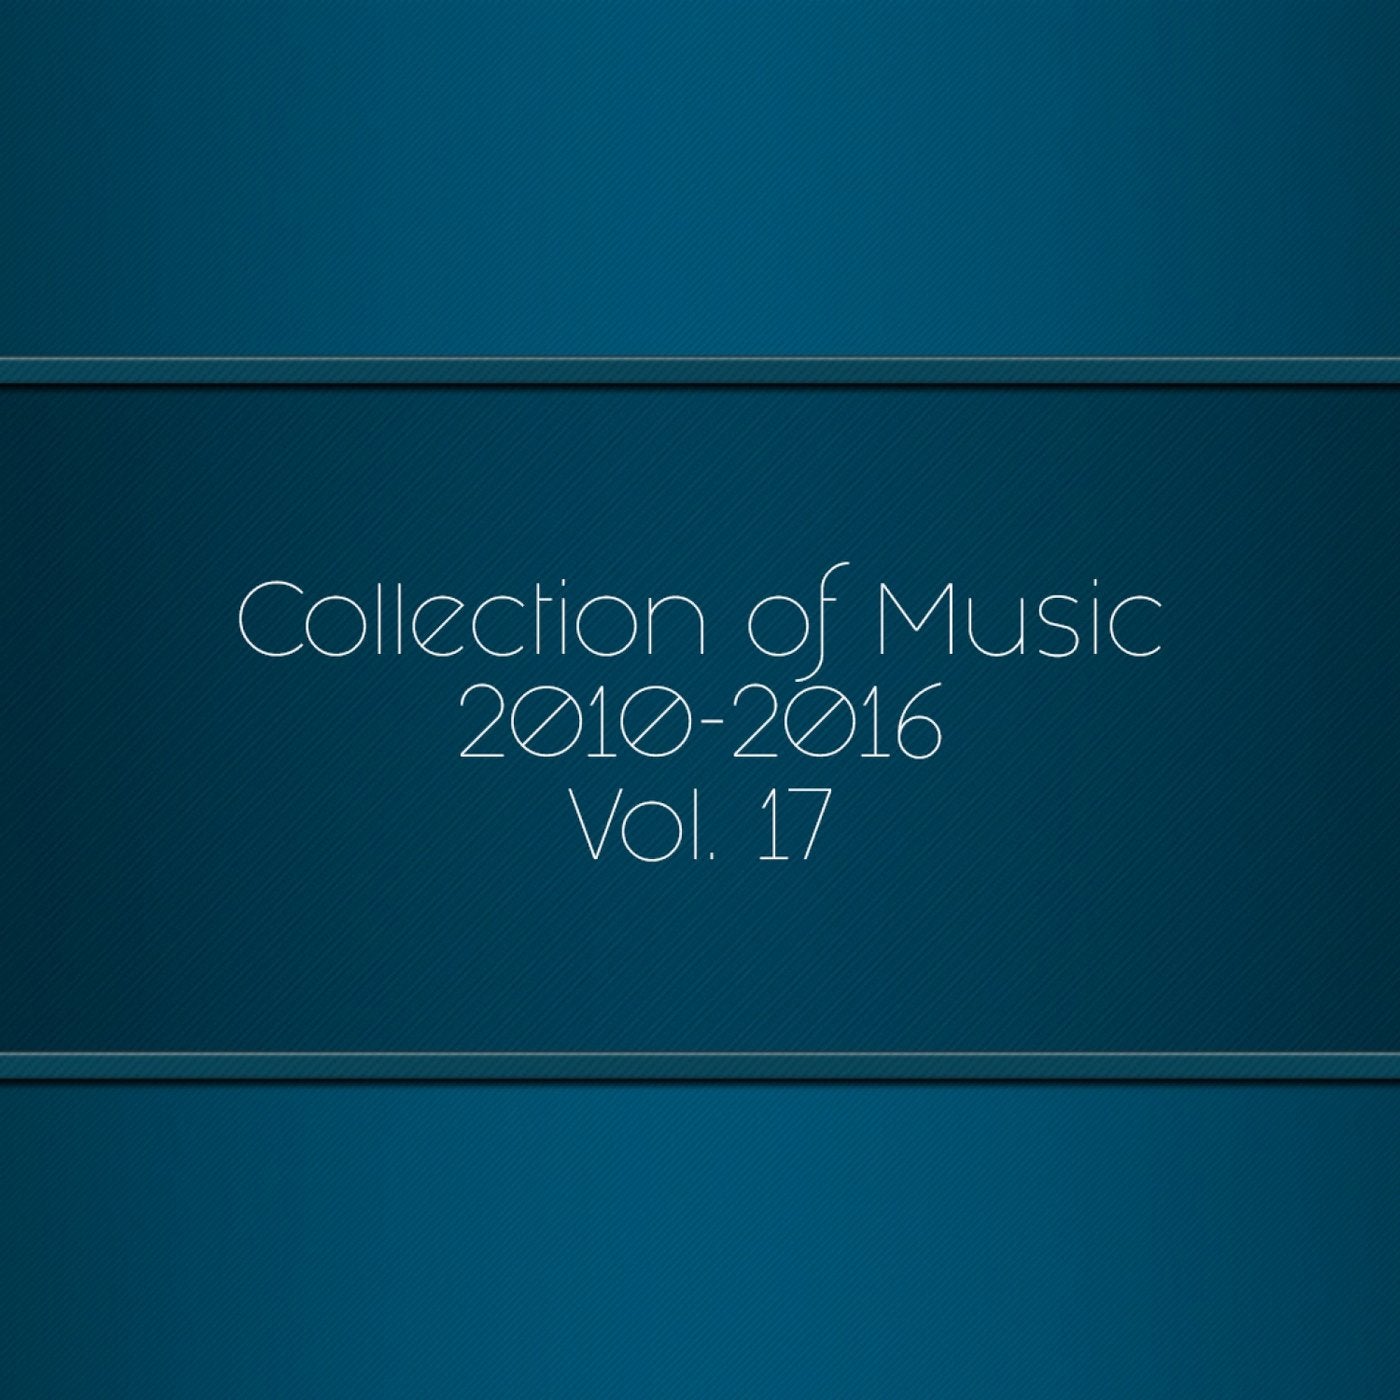 Collection of Music 2010-2016, Vol. 17